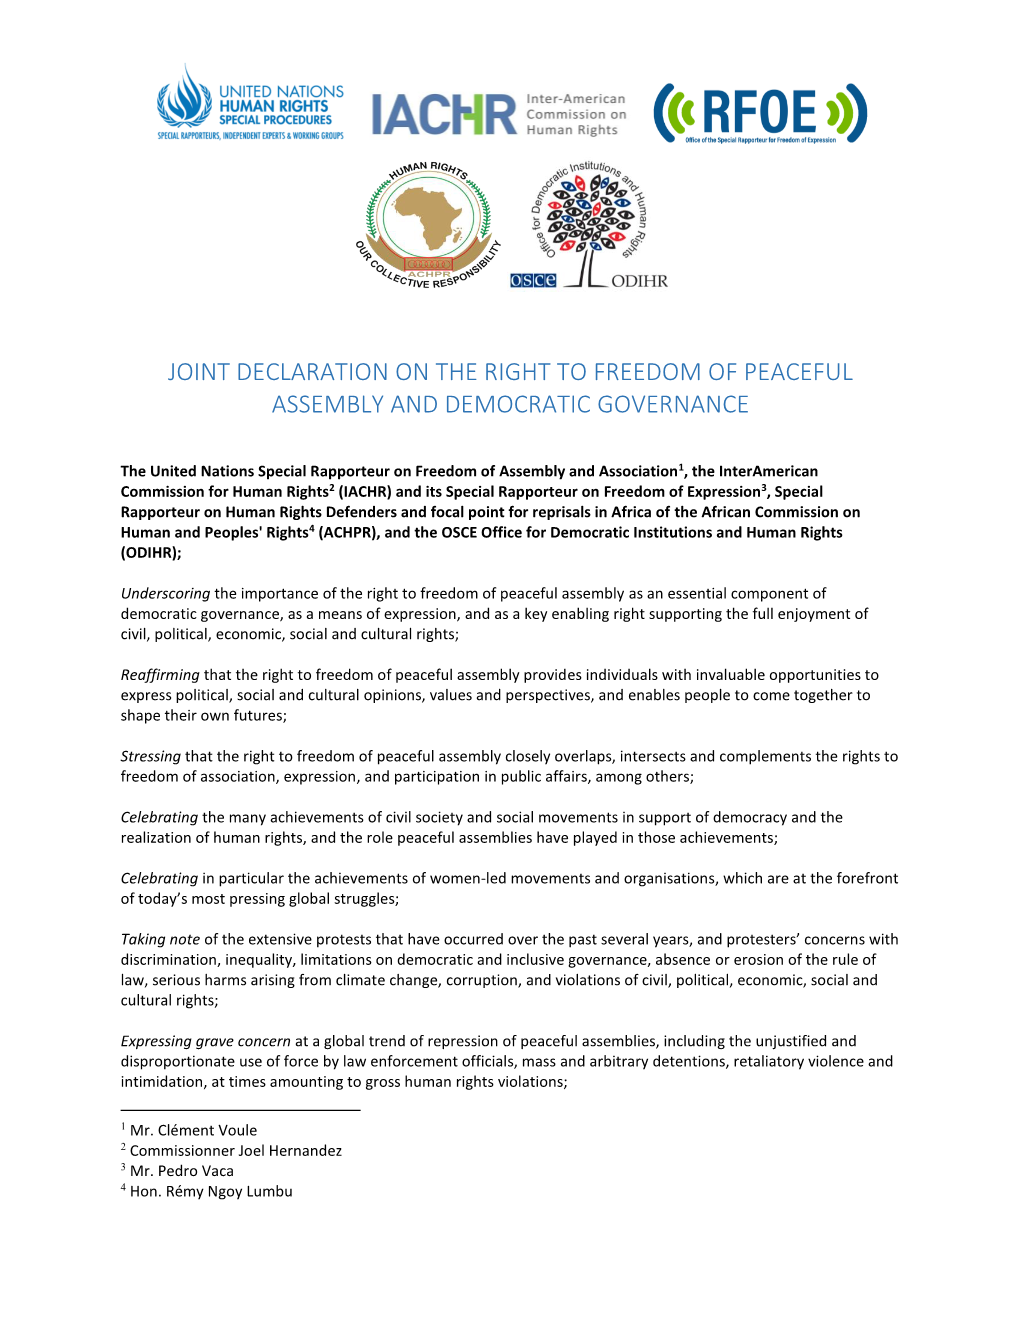 Joint Declaration on the Right to Freedom of Peaceful Assembly and Democratic Governance